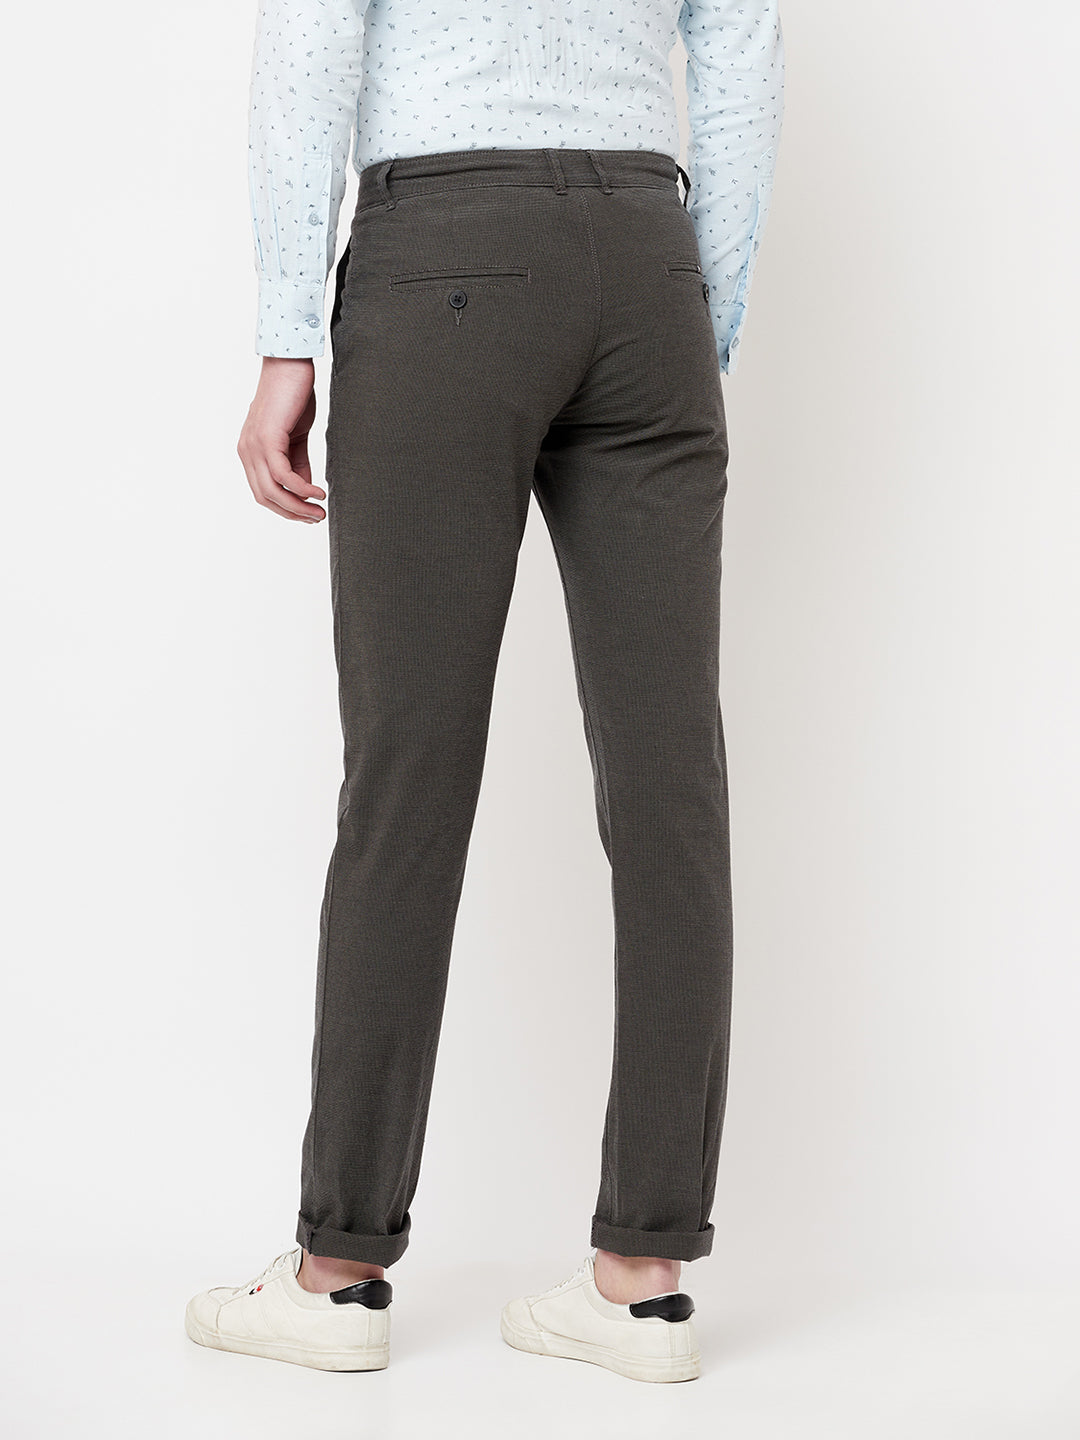 Olive Printed Trousers - Men Trousers